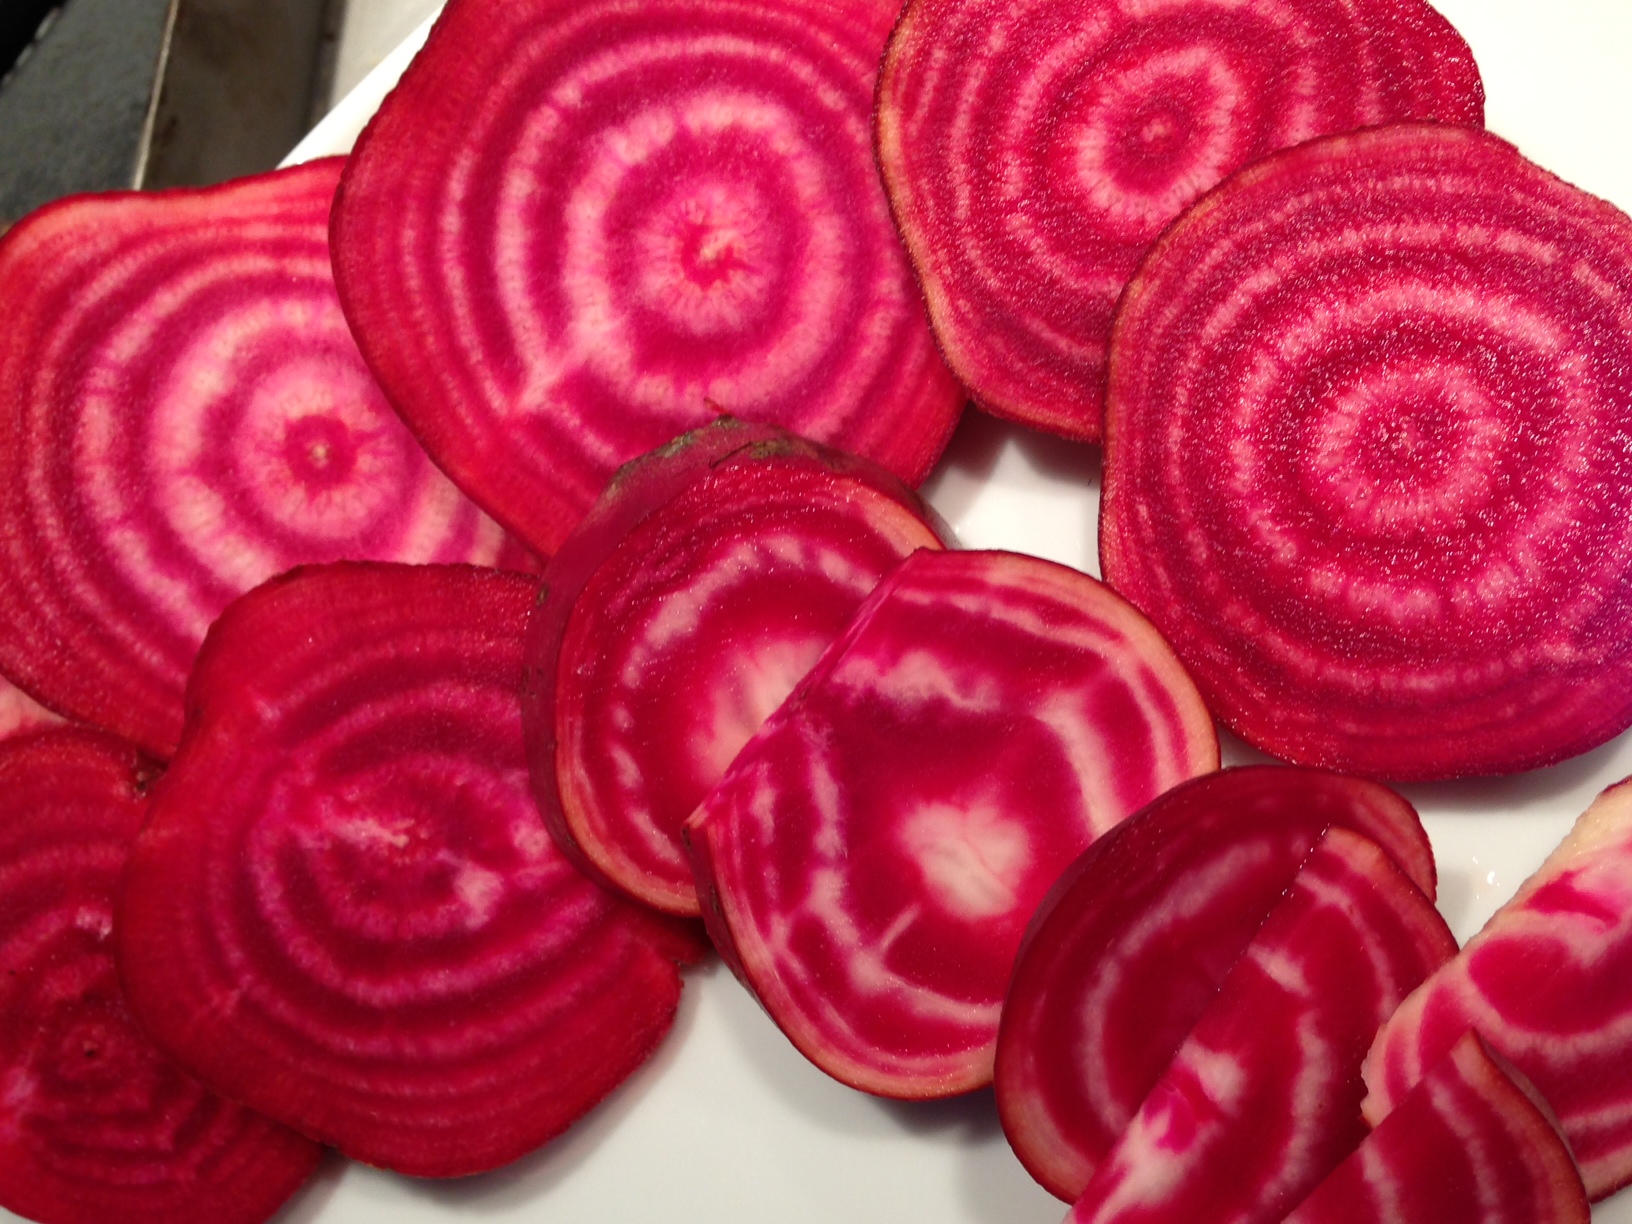 striped beets